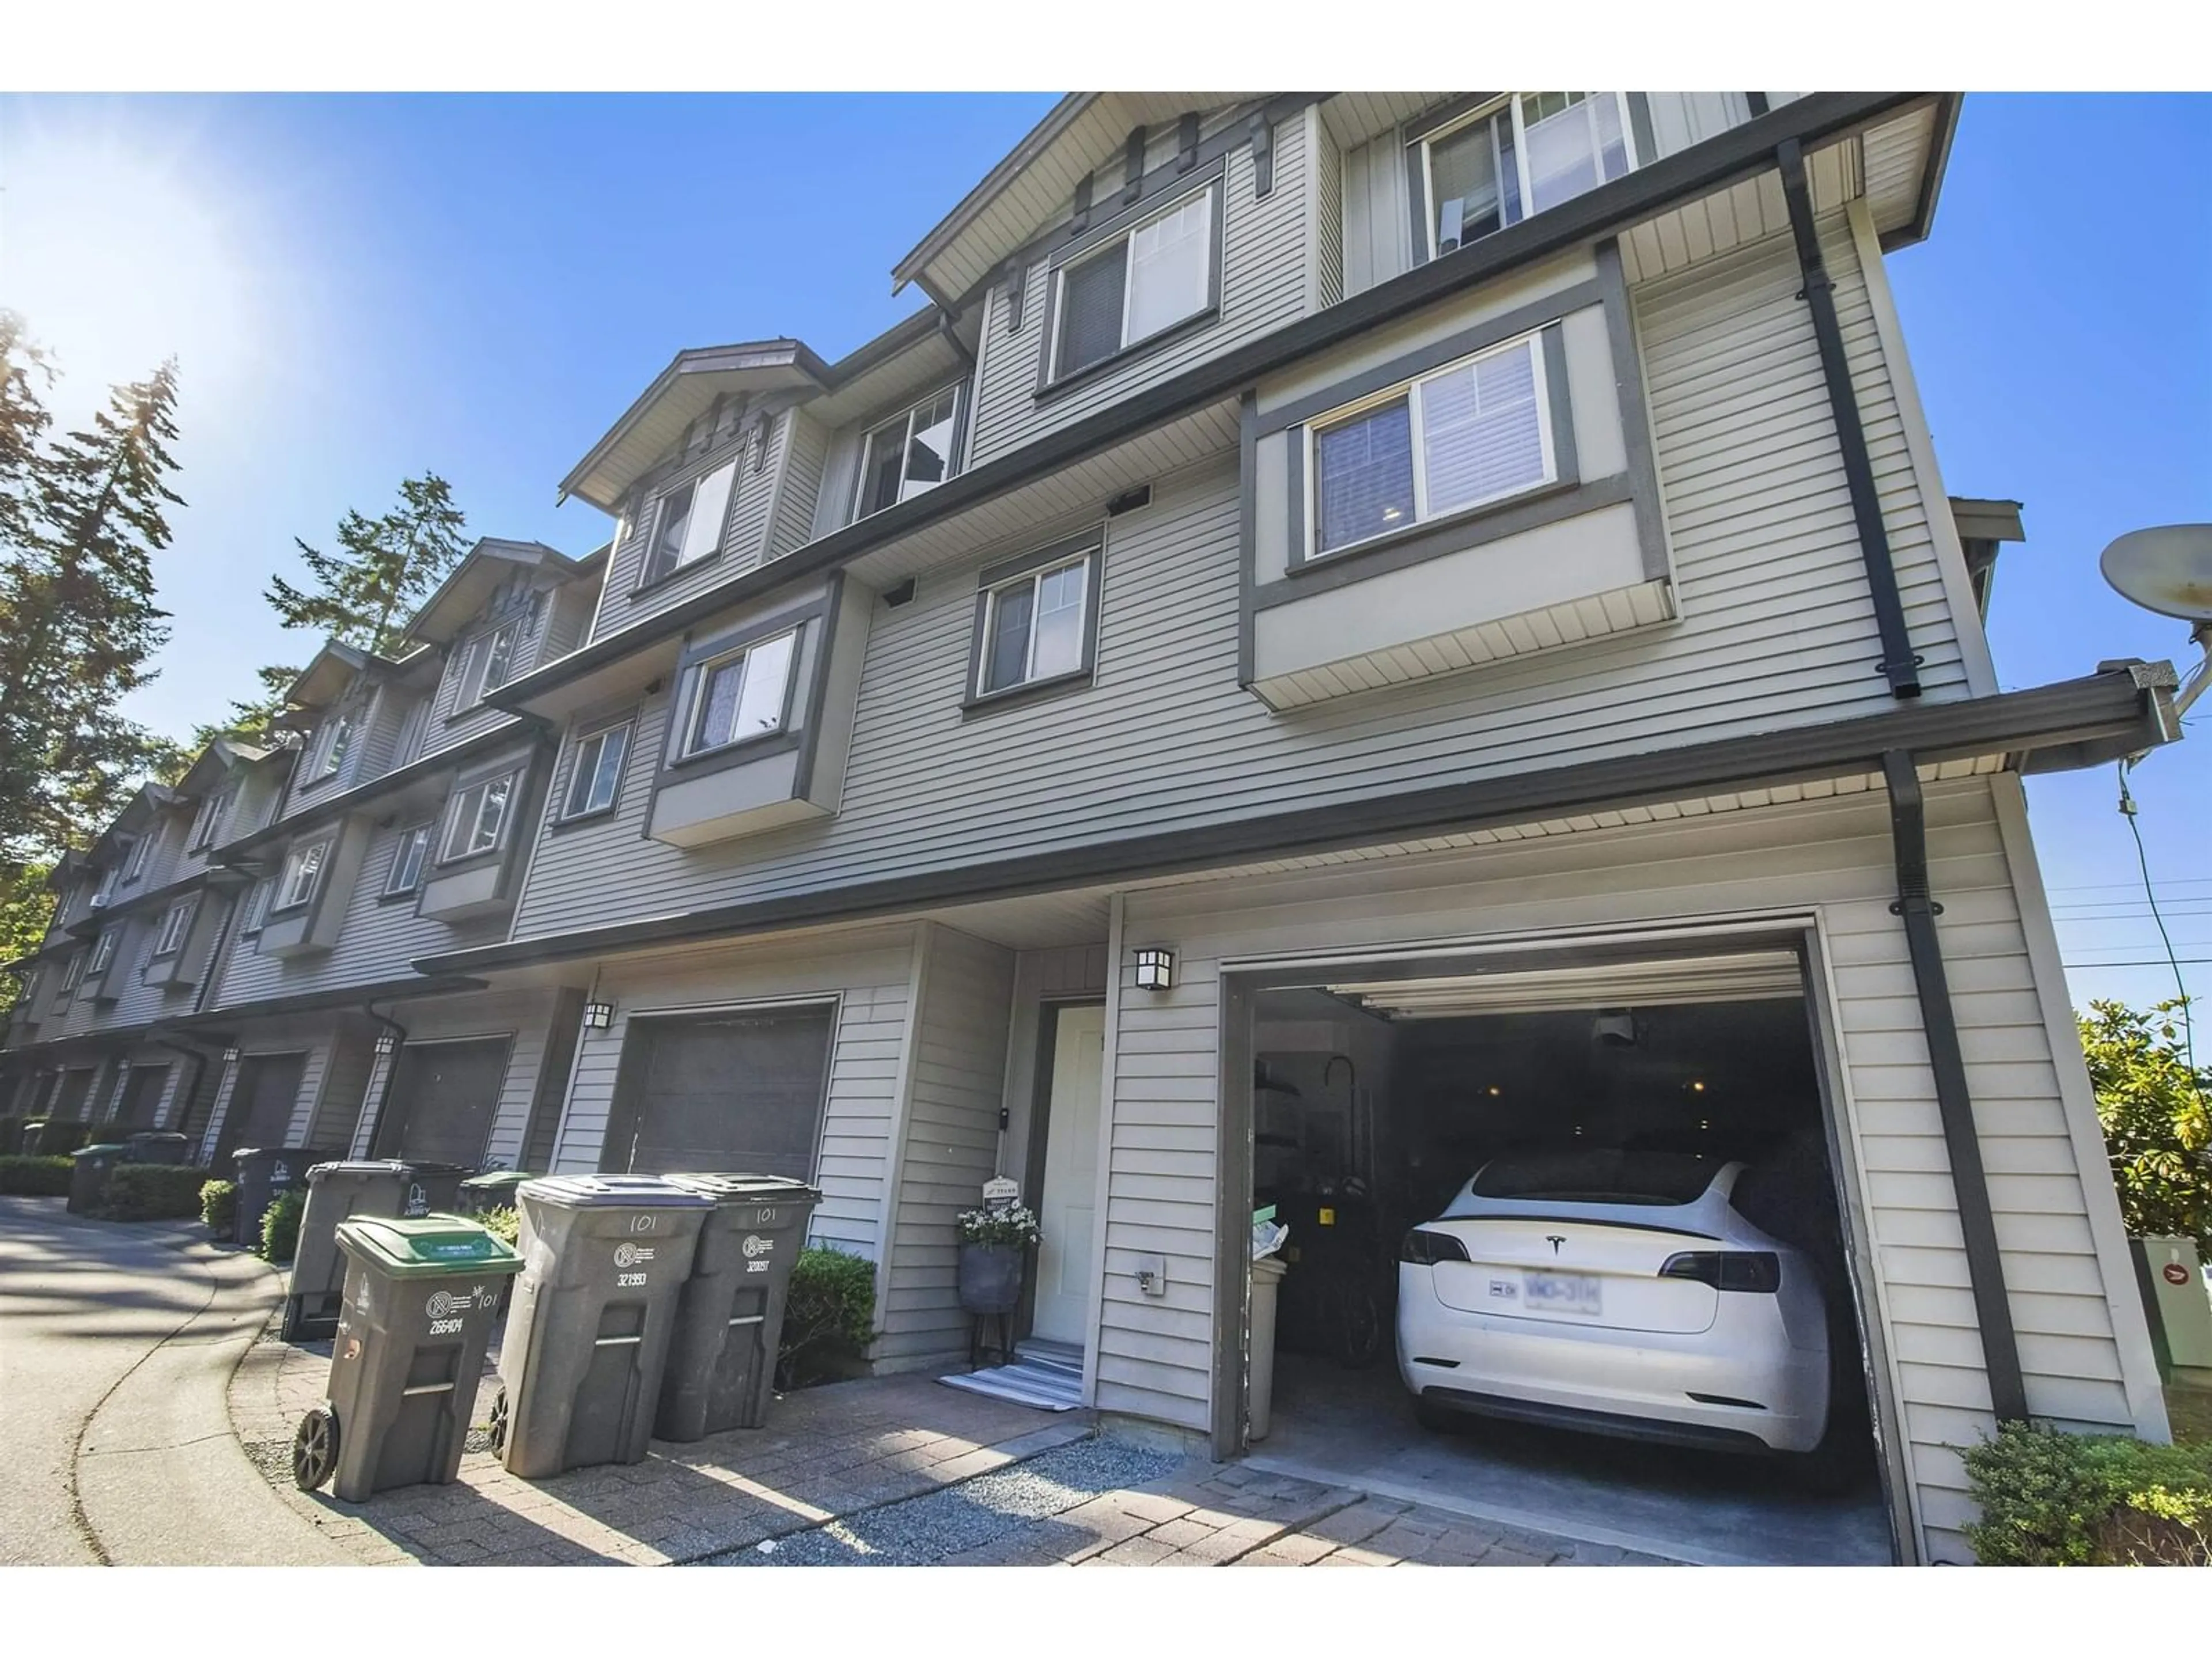 A pic from exterior of the house or condo for 101 13368 72 AVENUE, Surrey British Columbia V3W2N6